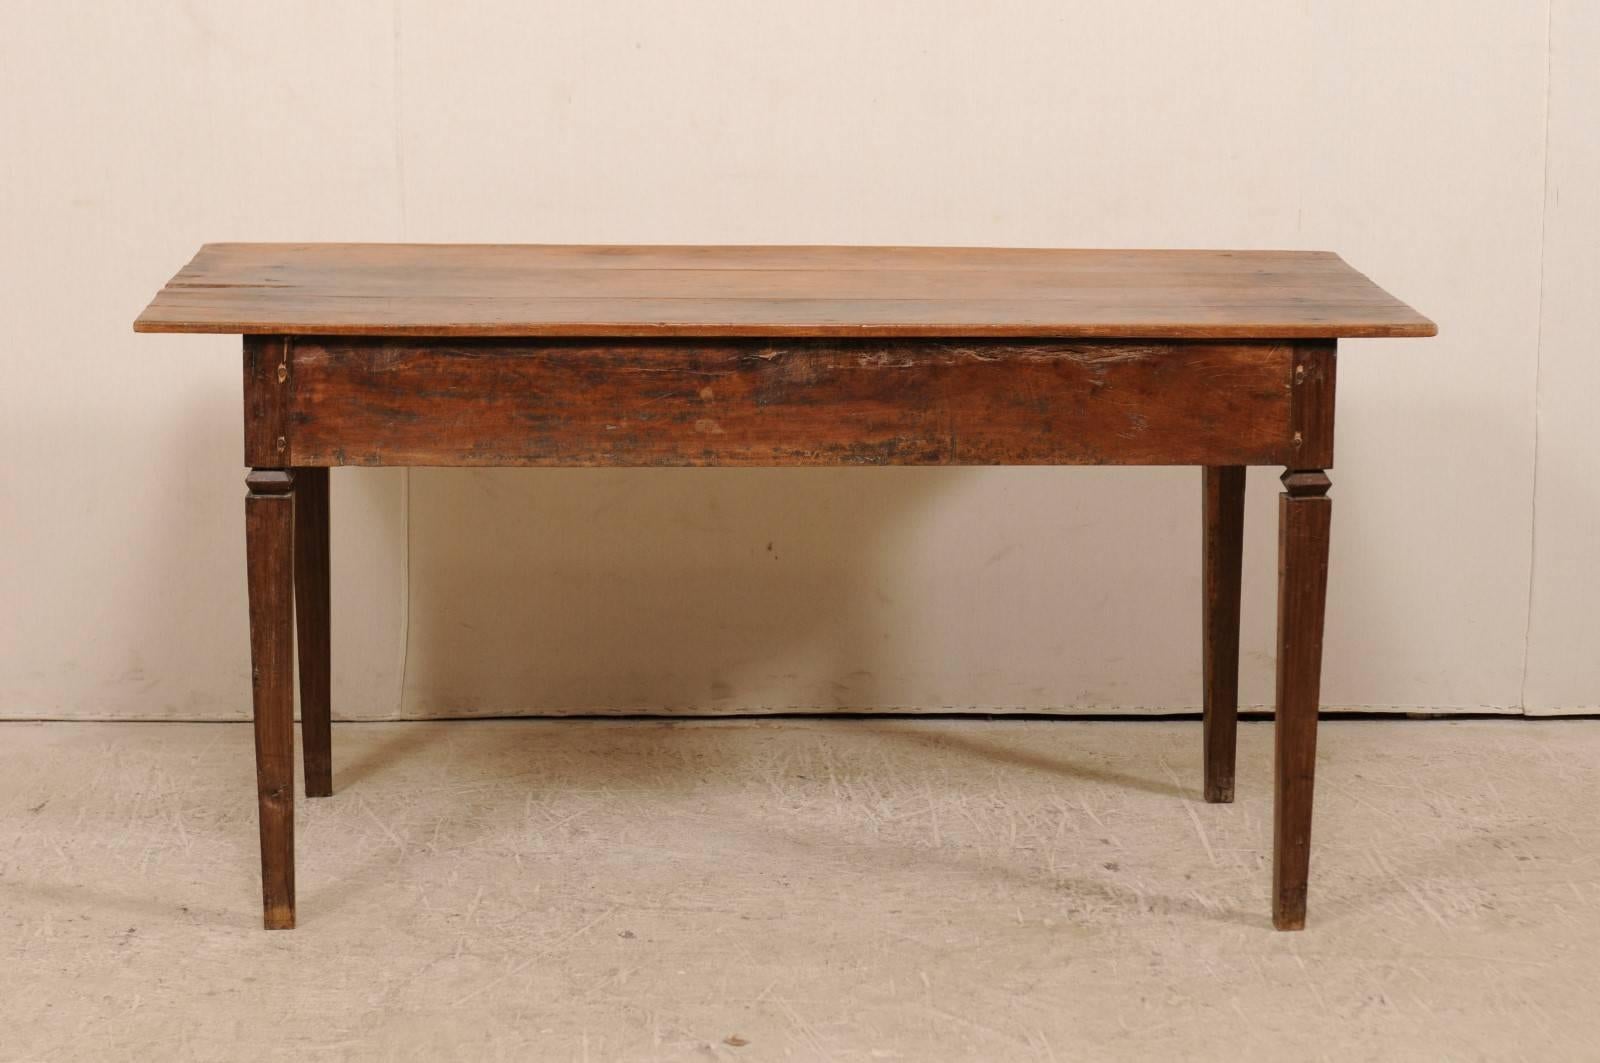 Brazilian 19th Century Carved Peroba Wood Table with Elegant Tapered Legs 2